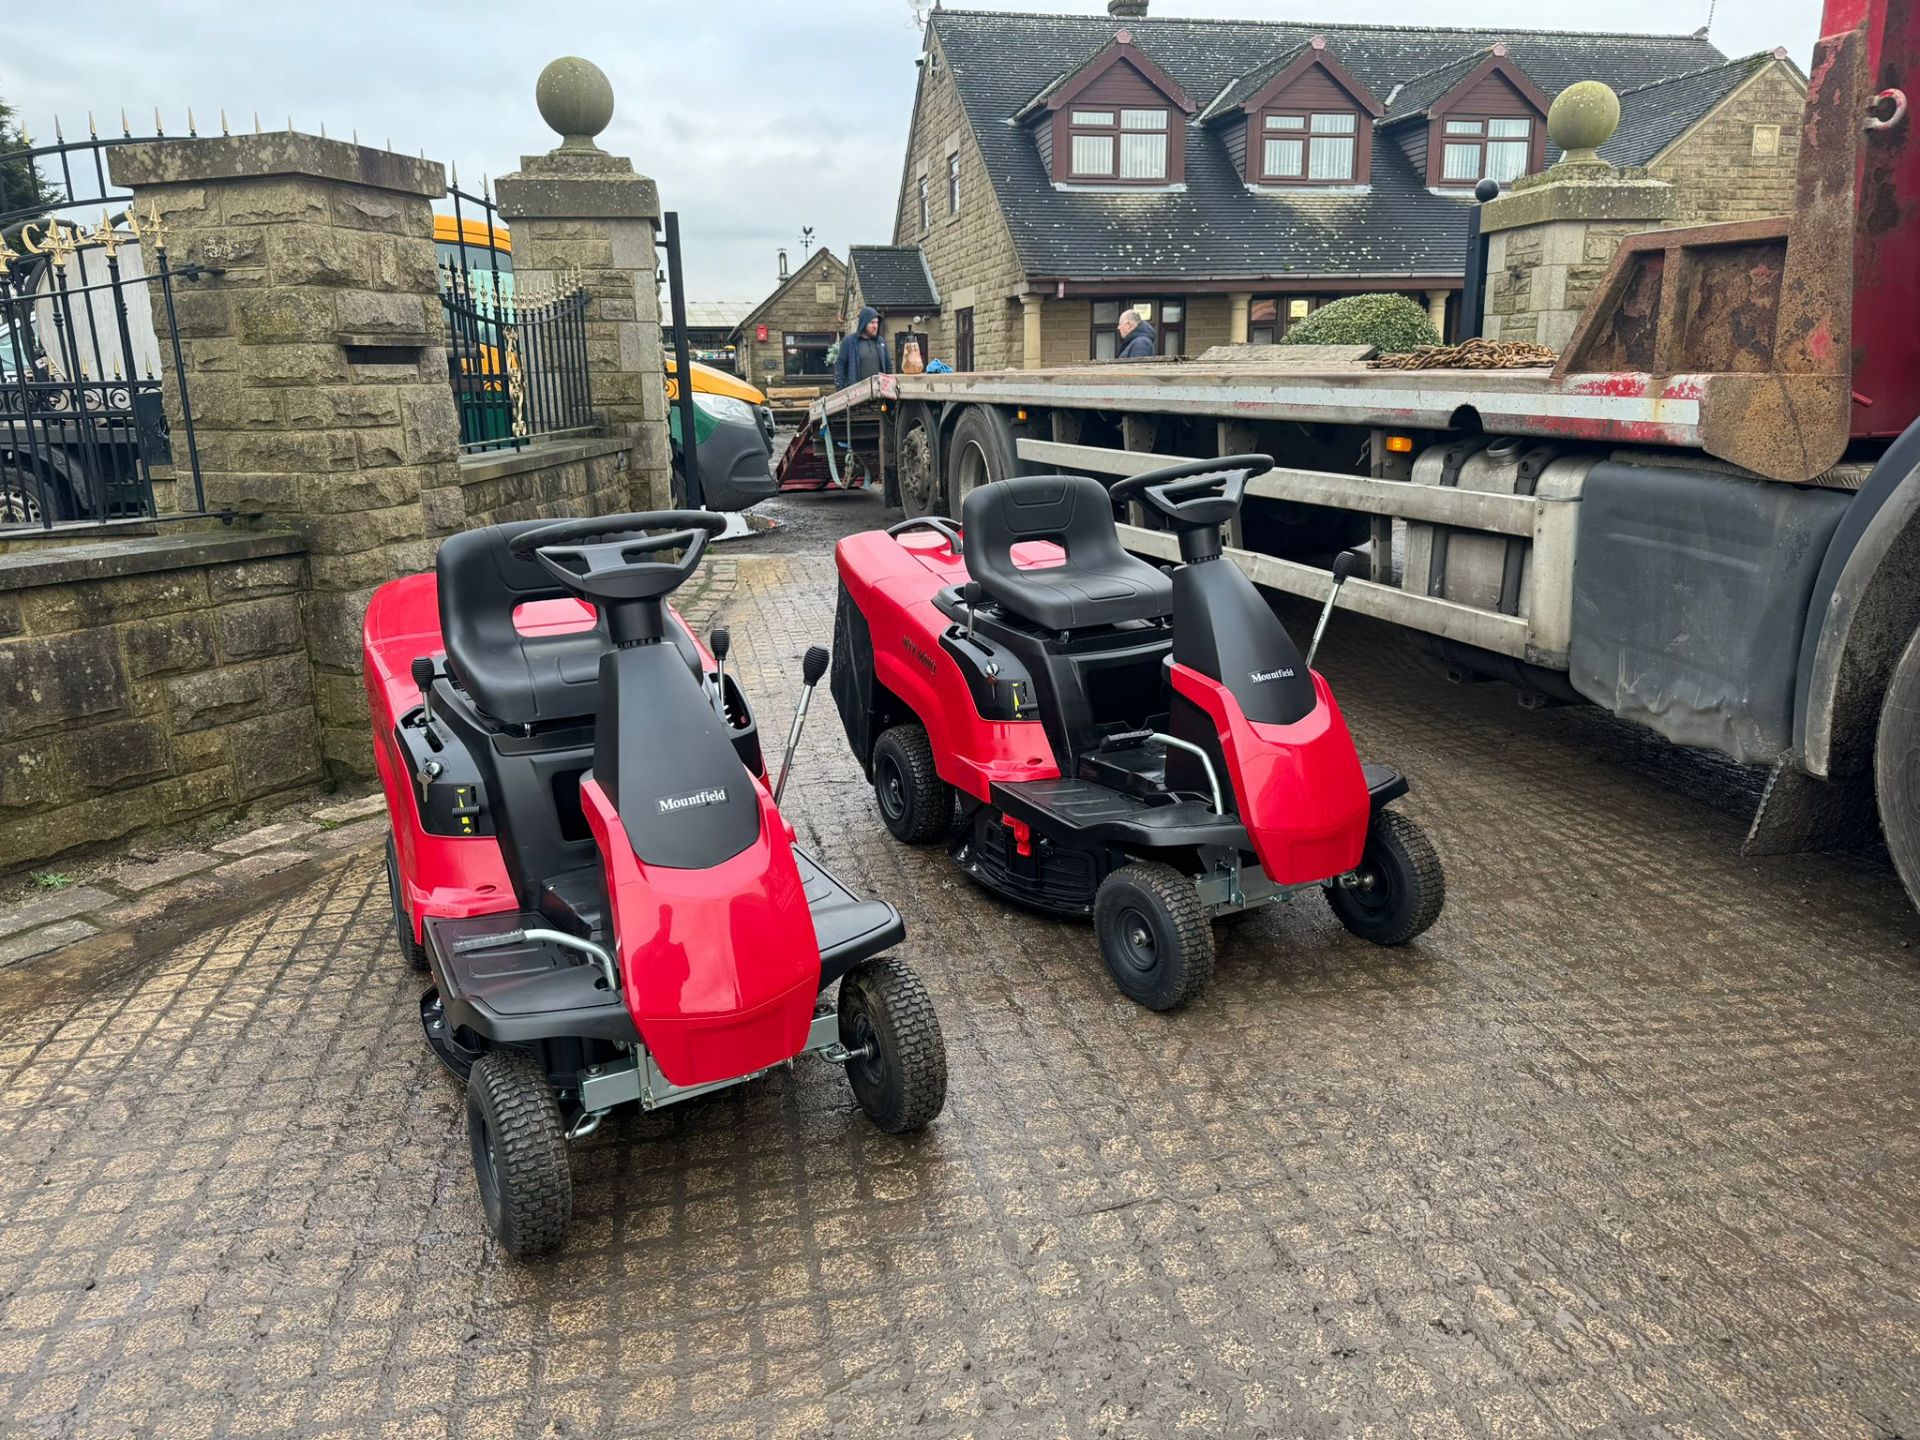 NEW/UNUSED MOUNTFIELD MTF 66 MQ RIDE ON MOWER WITH REAR COLLECTOR *PLUS VAT* - Image 4 of 11